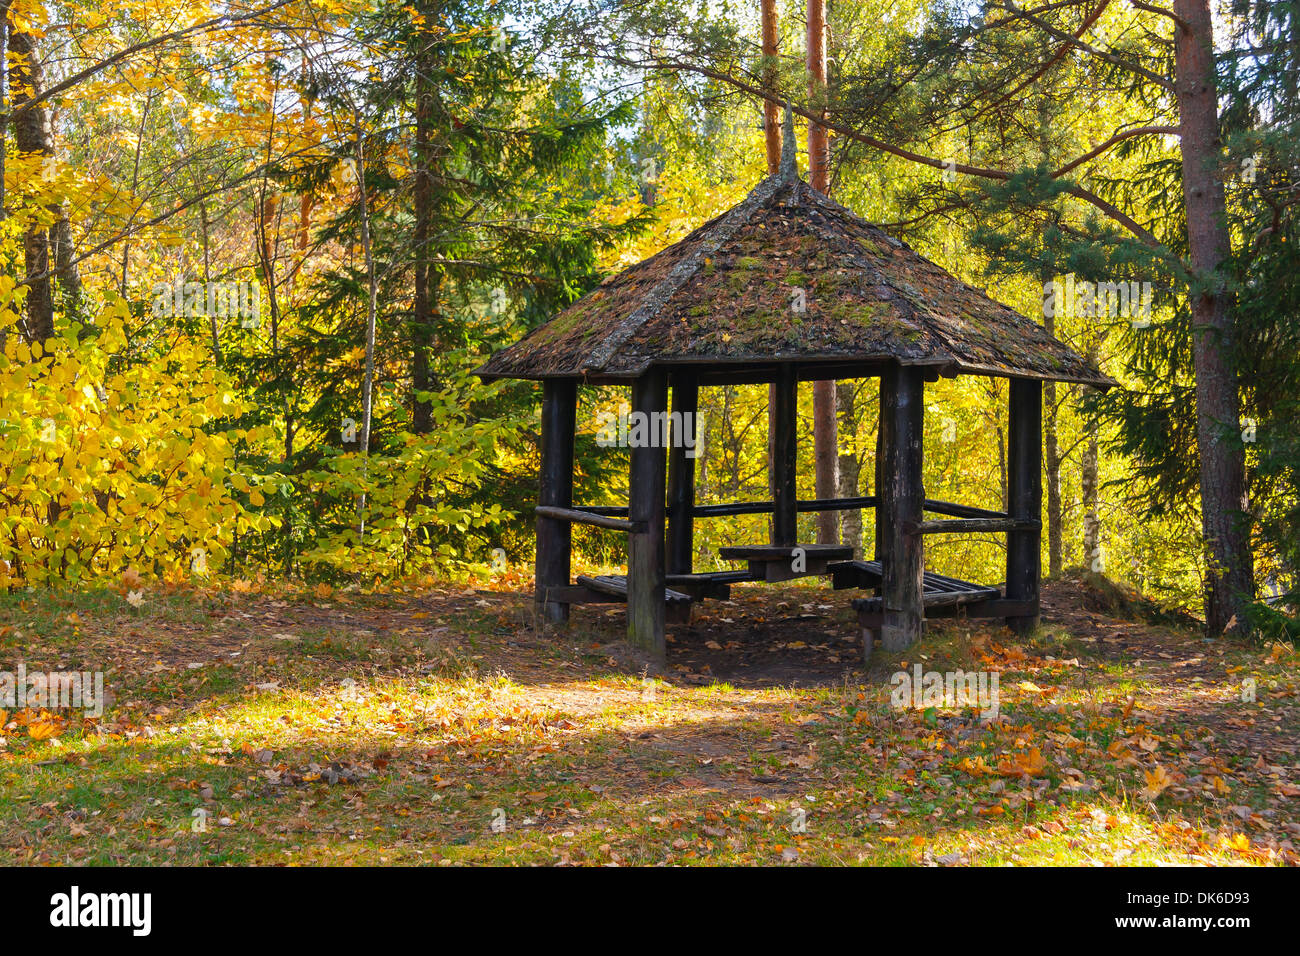 Camp area with a hut in greenish and yellowish forest. Stock Photo